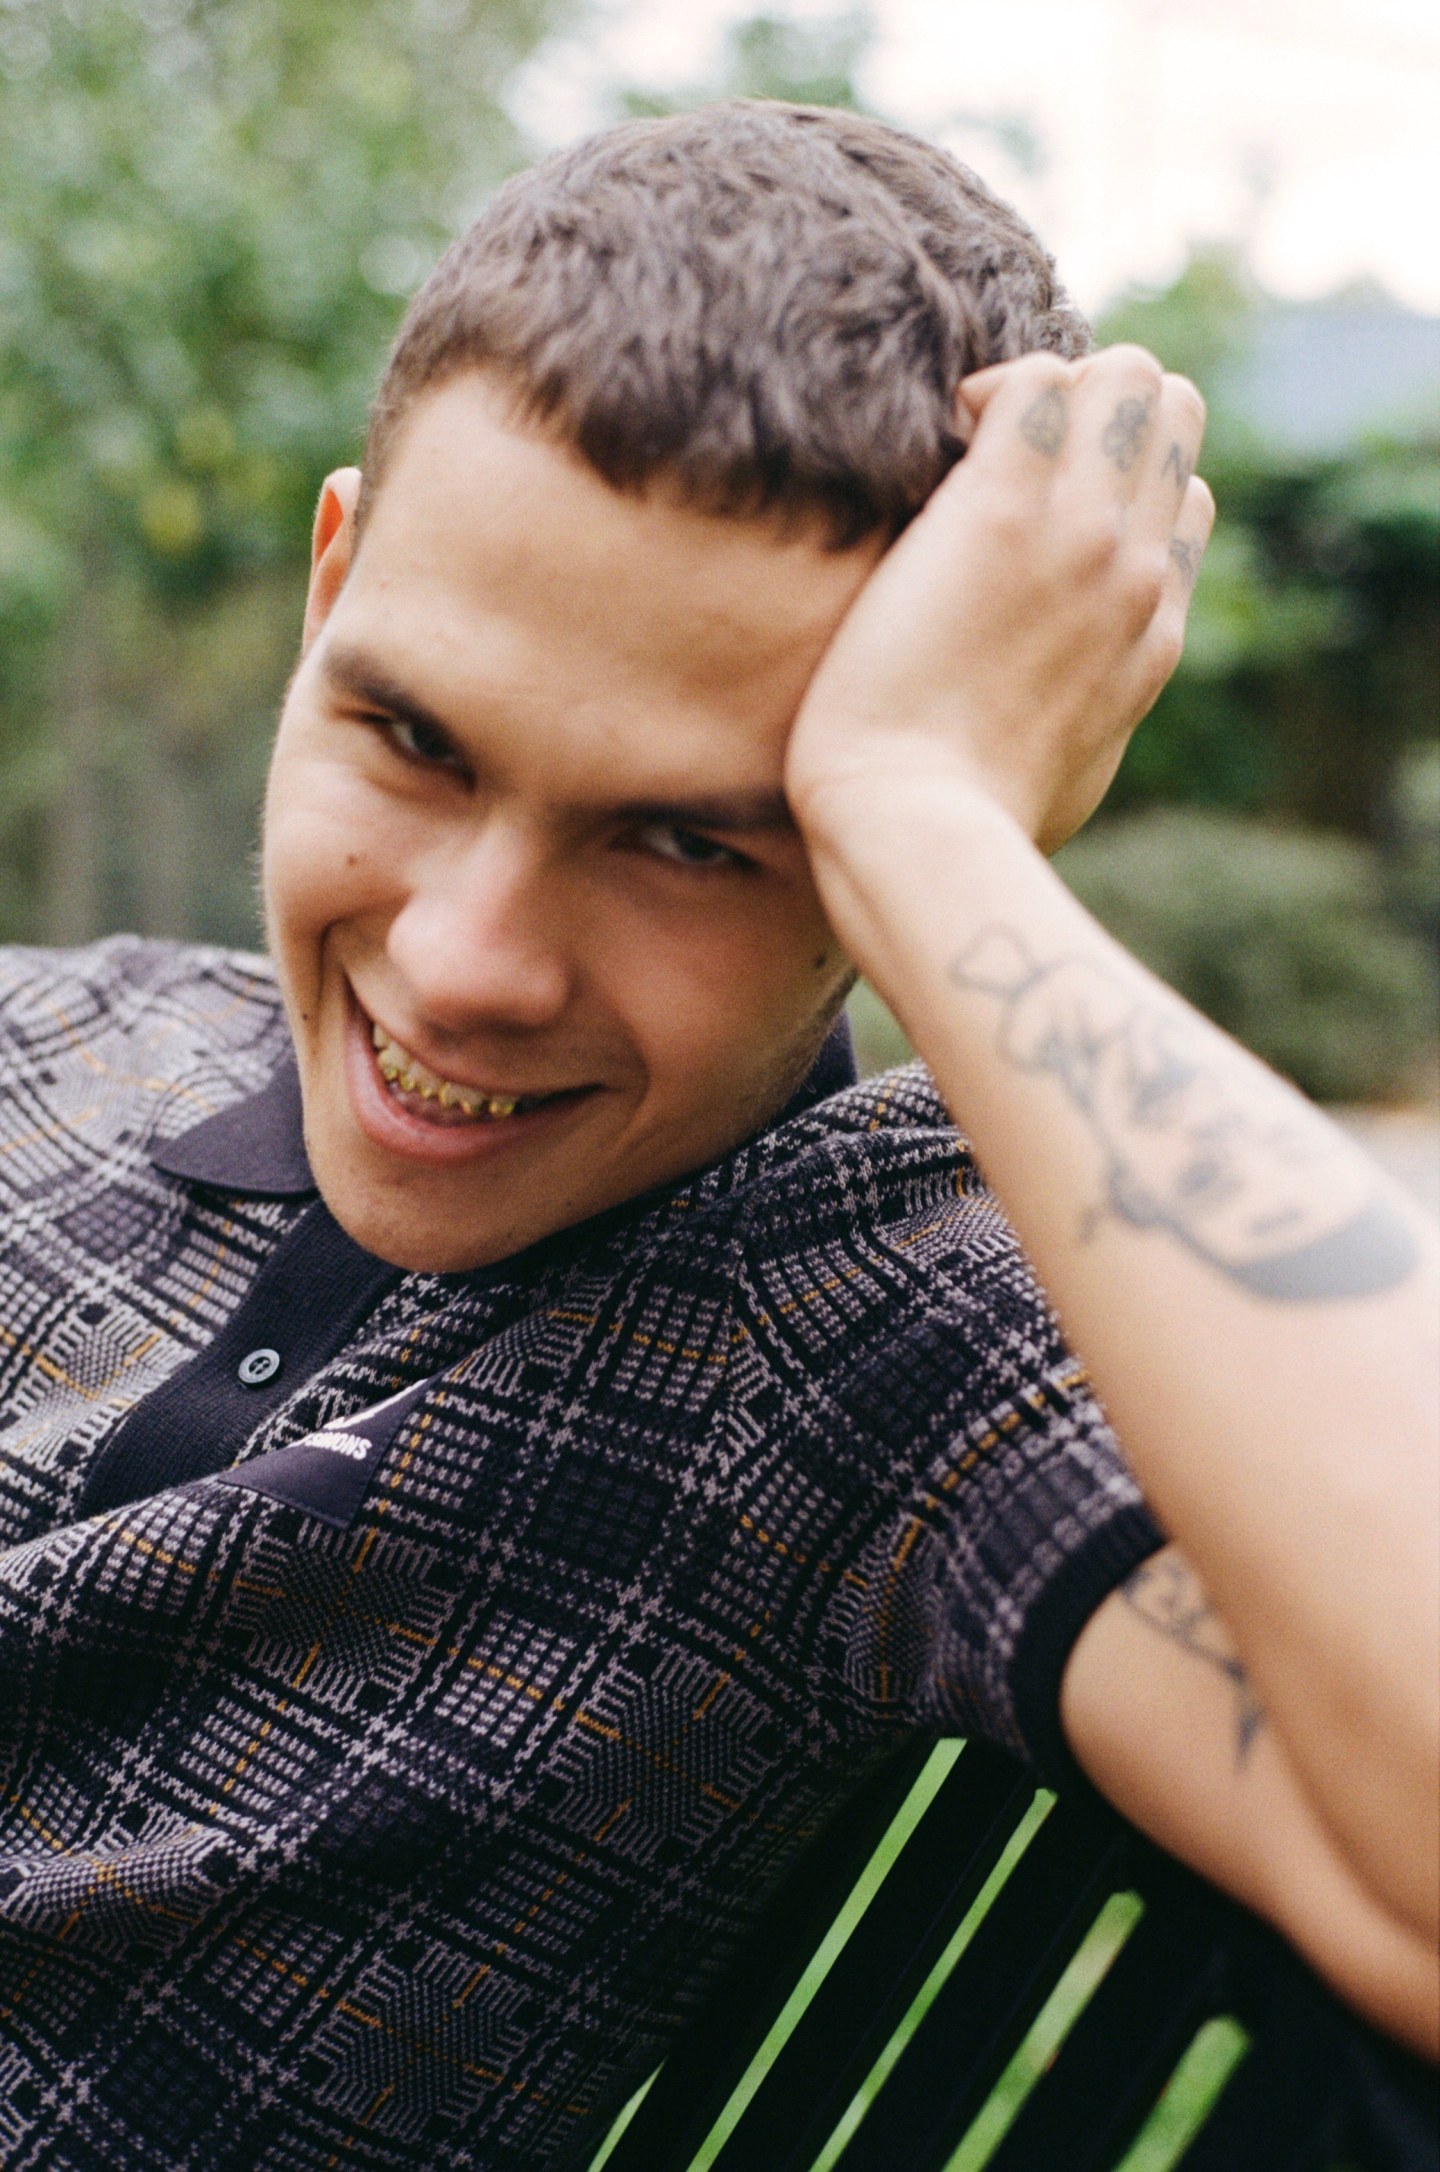 slowthai makes angry songs for a brighter future